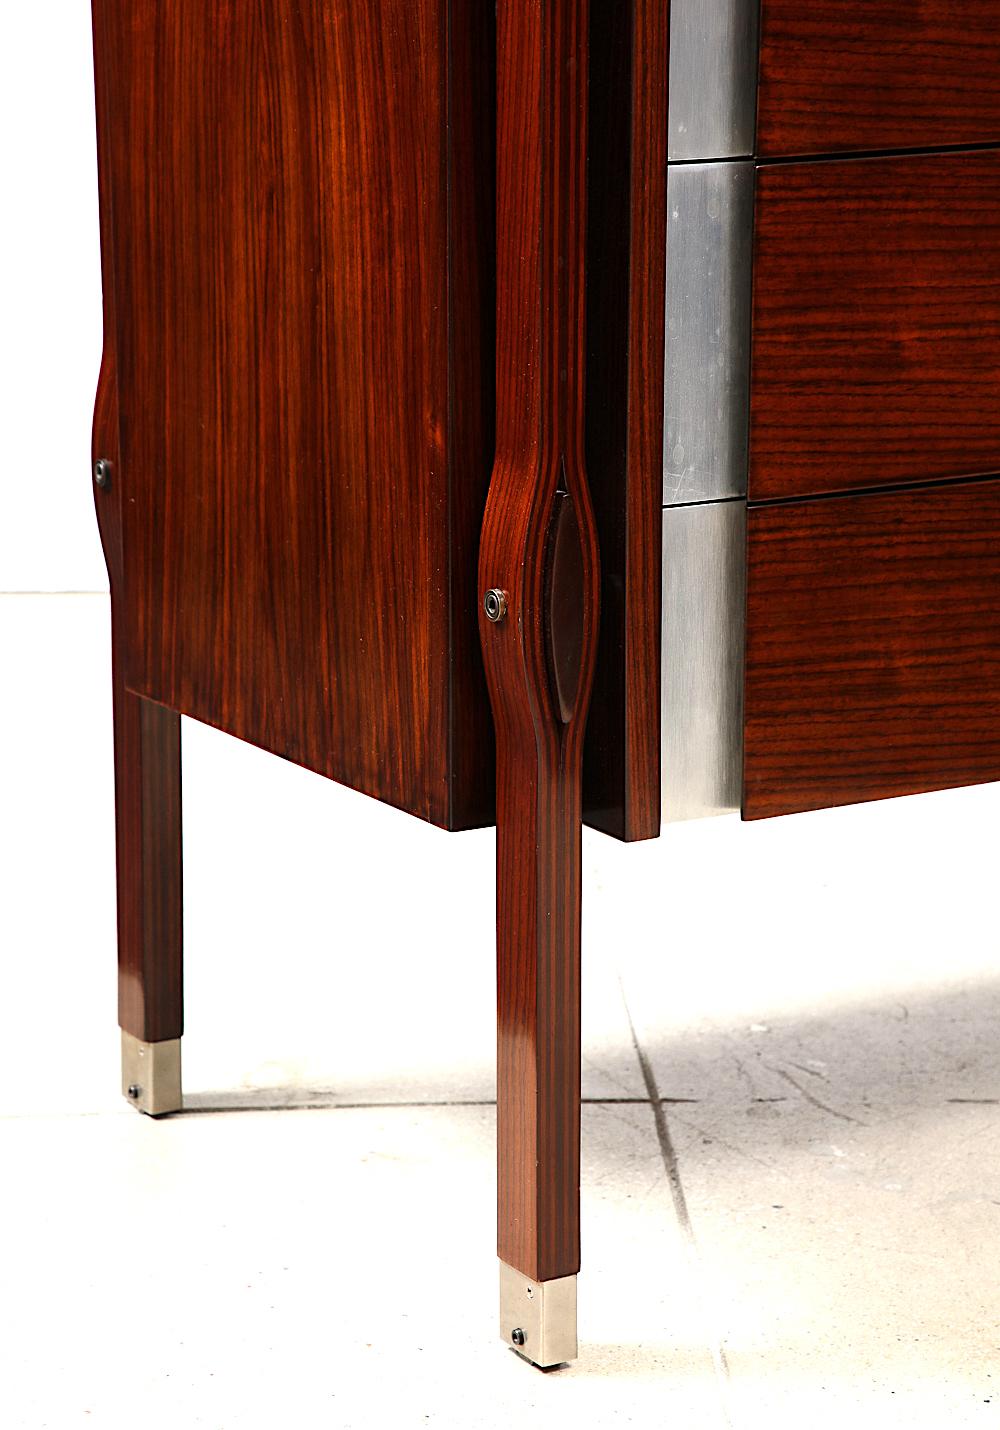 Rosewood, aluminum, brass. Chest of drawers from the Taormina line for MIM. 4 drawers with hidden locking side panel. Fantastic design with curved wood legs and elliptical slab-stretchers. Original lock key included.